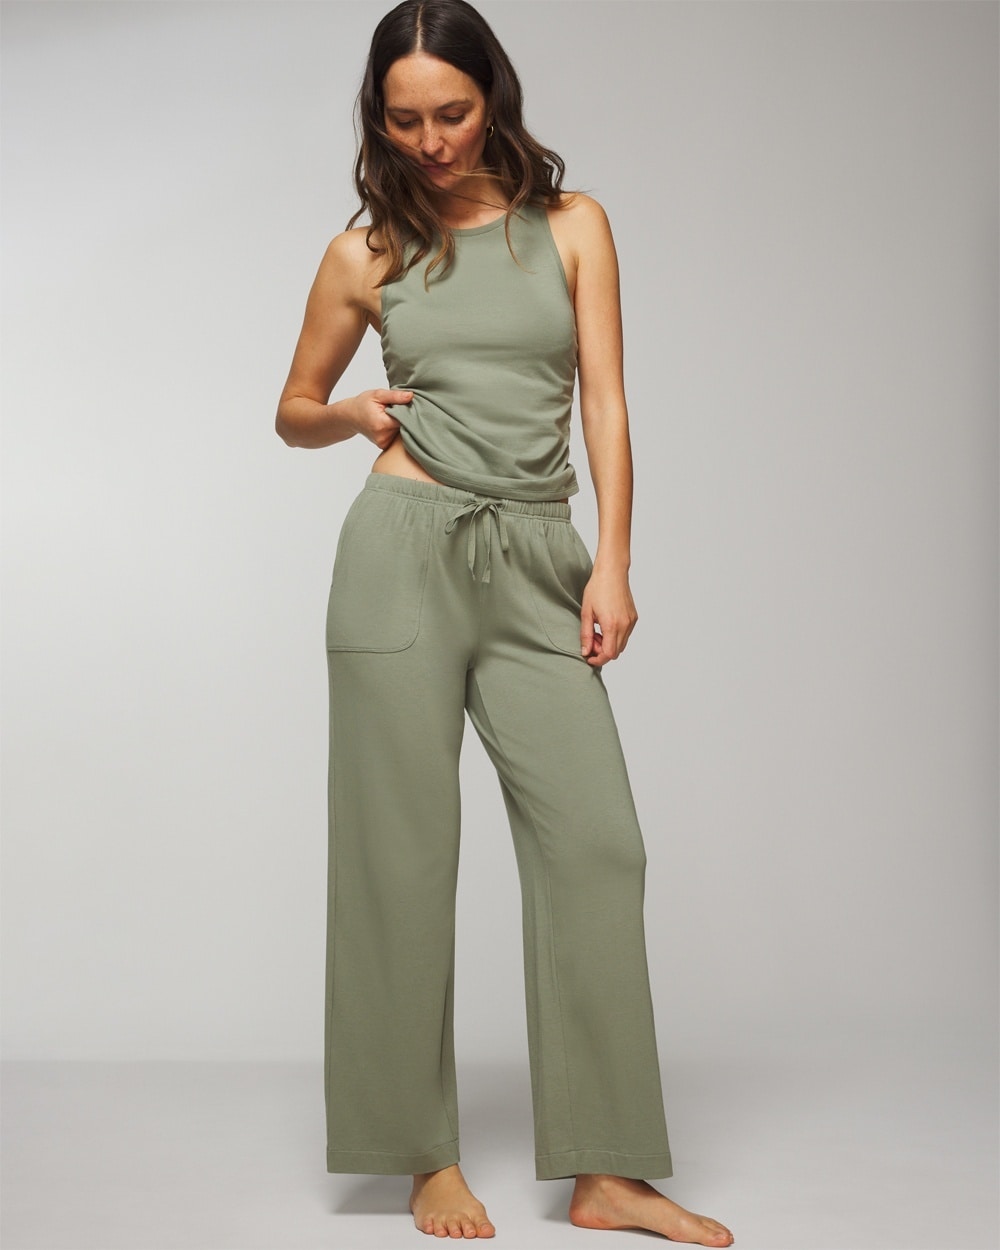 Soma Women's Most Loved Cotton Pajama Pants In Sage Green Size 2xl |